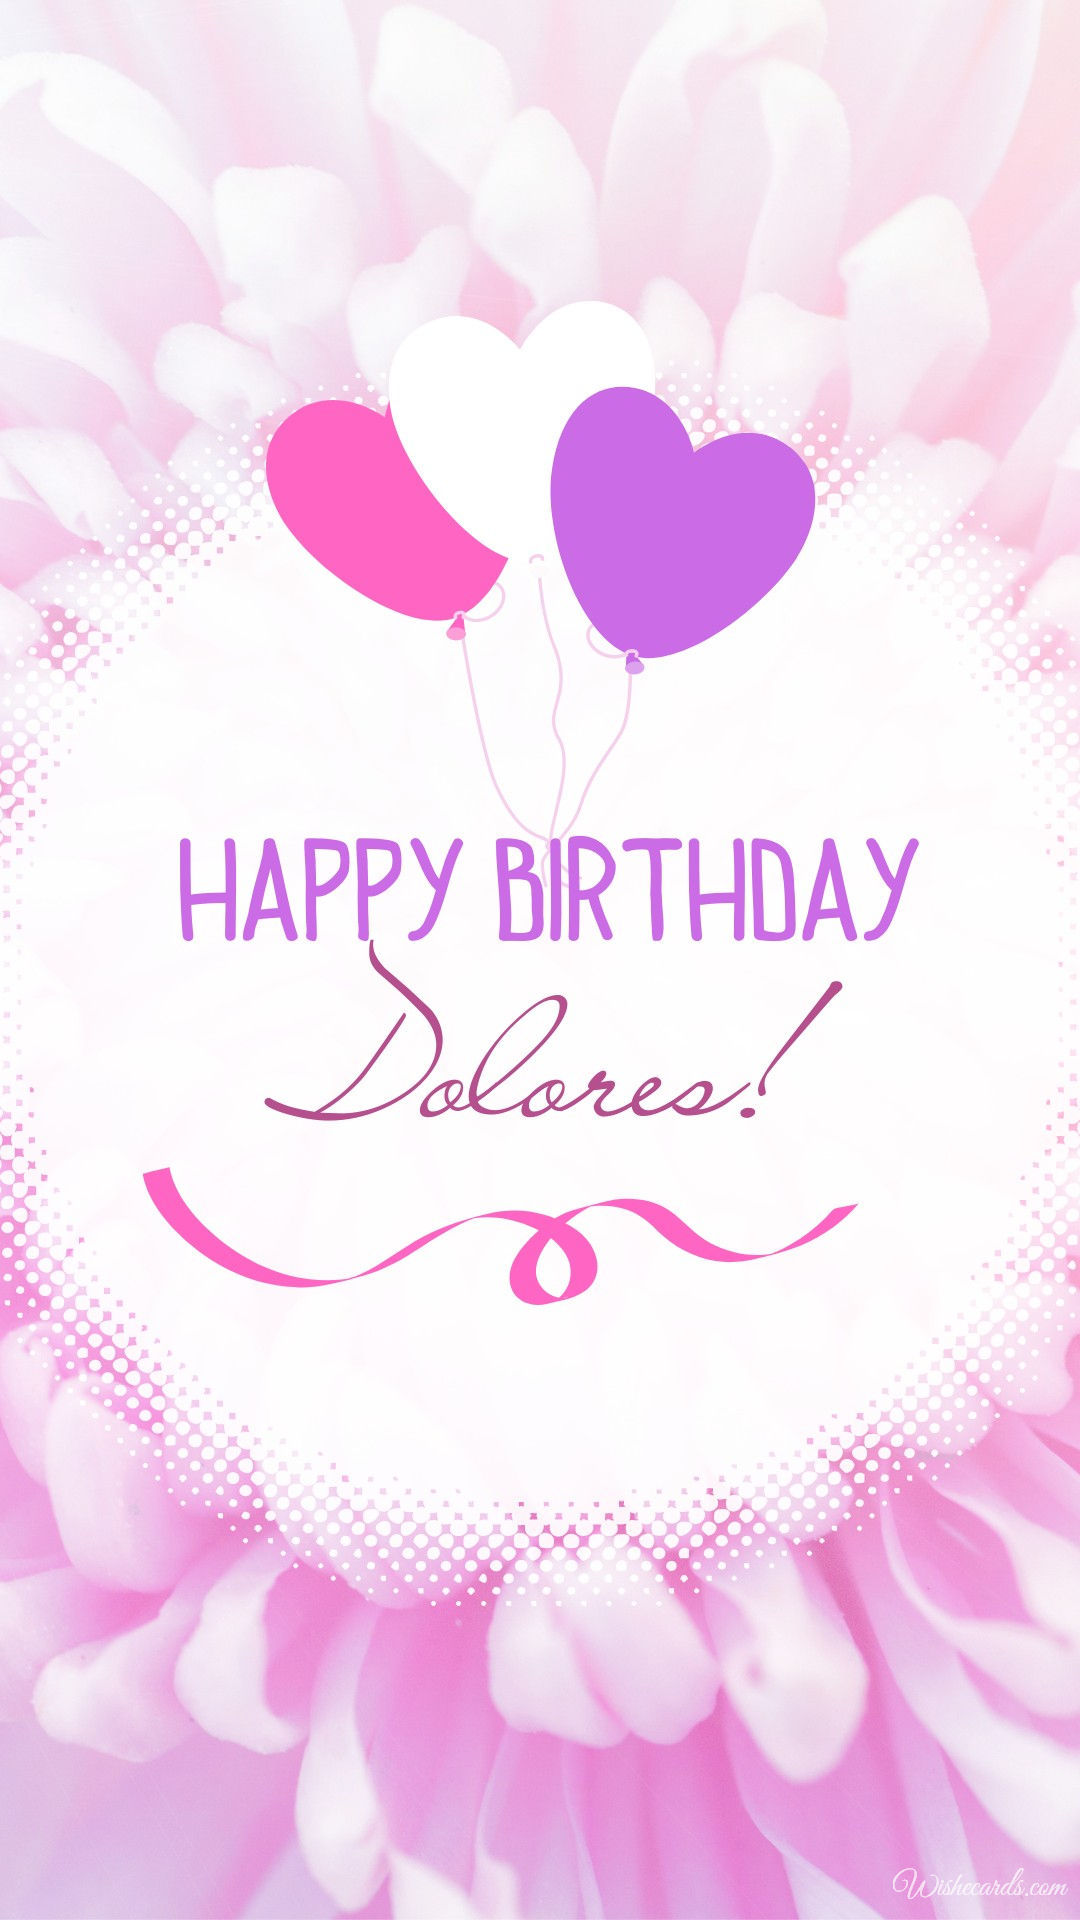 Happy Birthday Card for Dolores